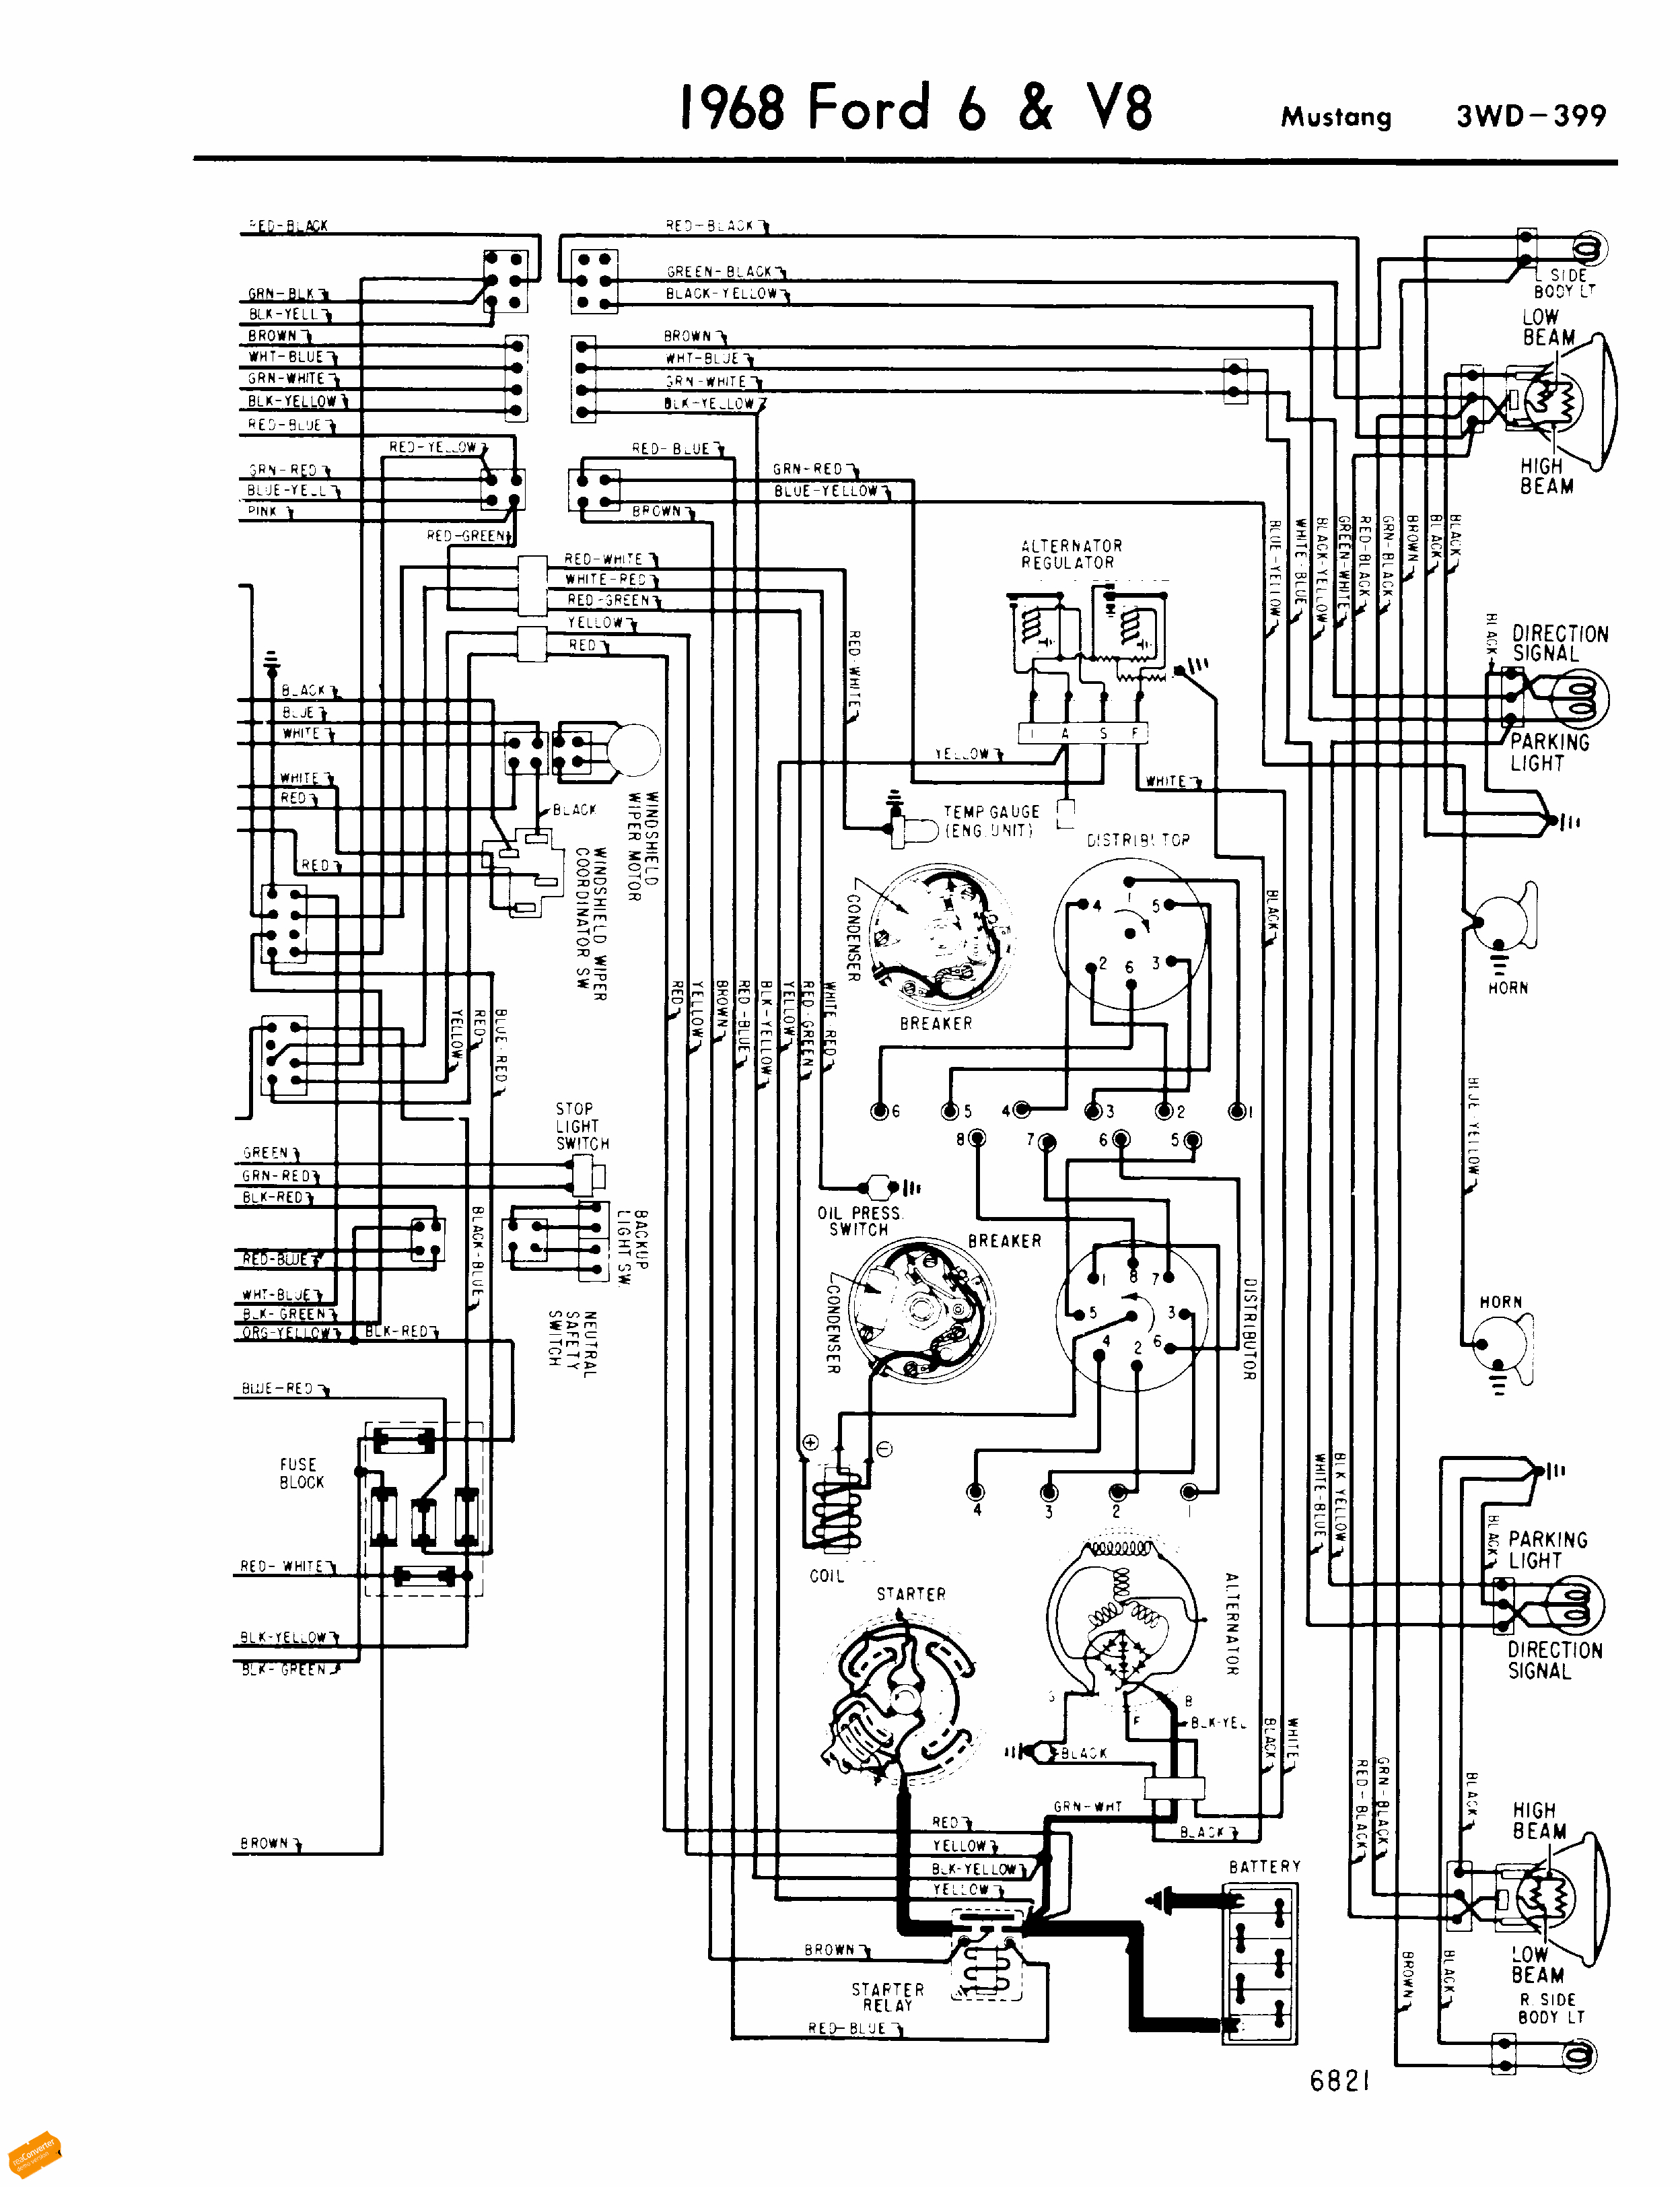 Ford Wiring Diagrams Ford Wiring Schematics Wiring Diagrams Show